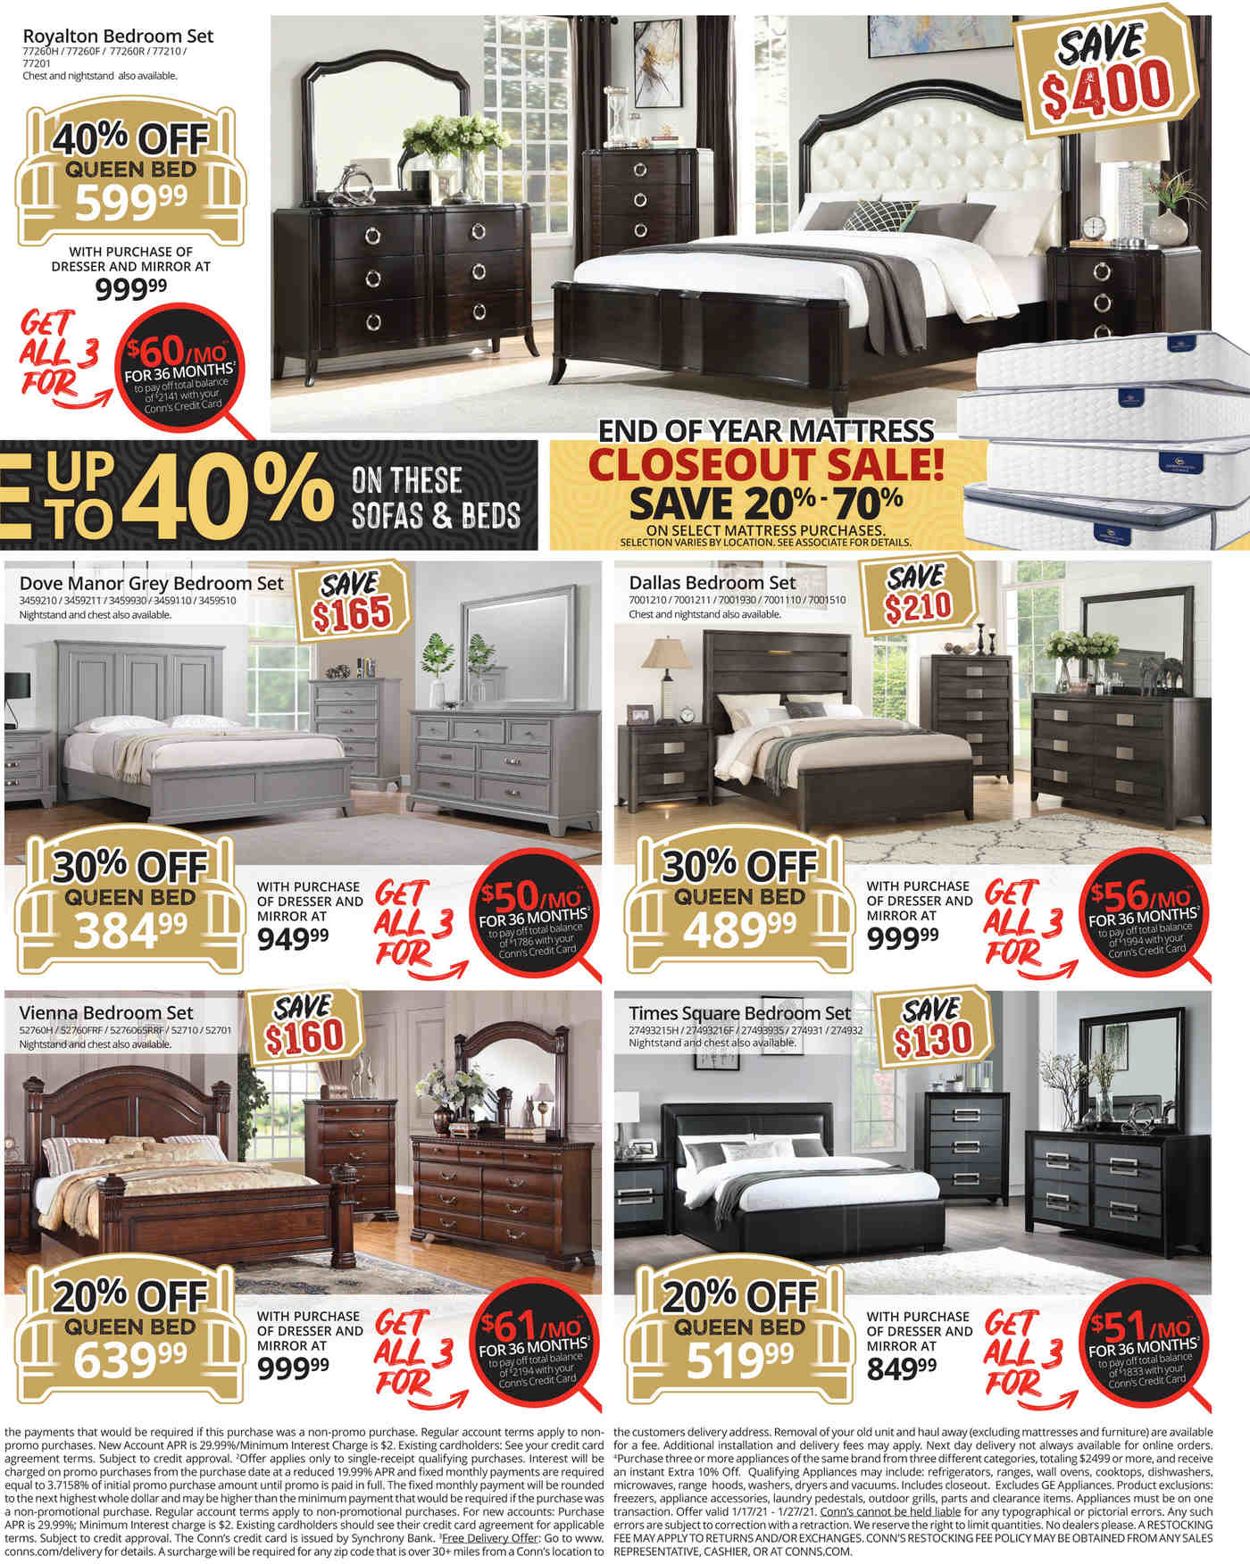 Conn's Home Plus Low Prices on Furniture and More 2021 Weekly Ad Circular - valid 01/17-01/23/2021 (Page 3)